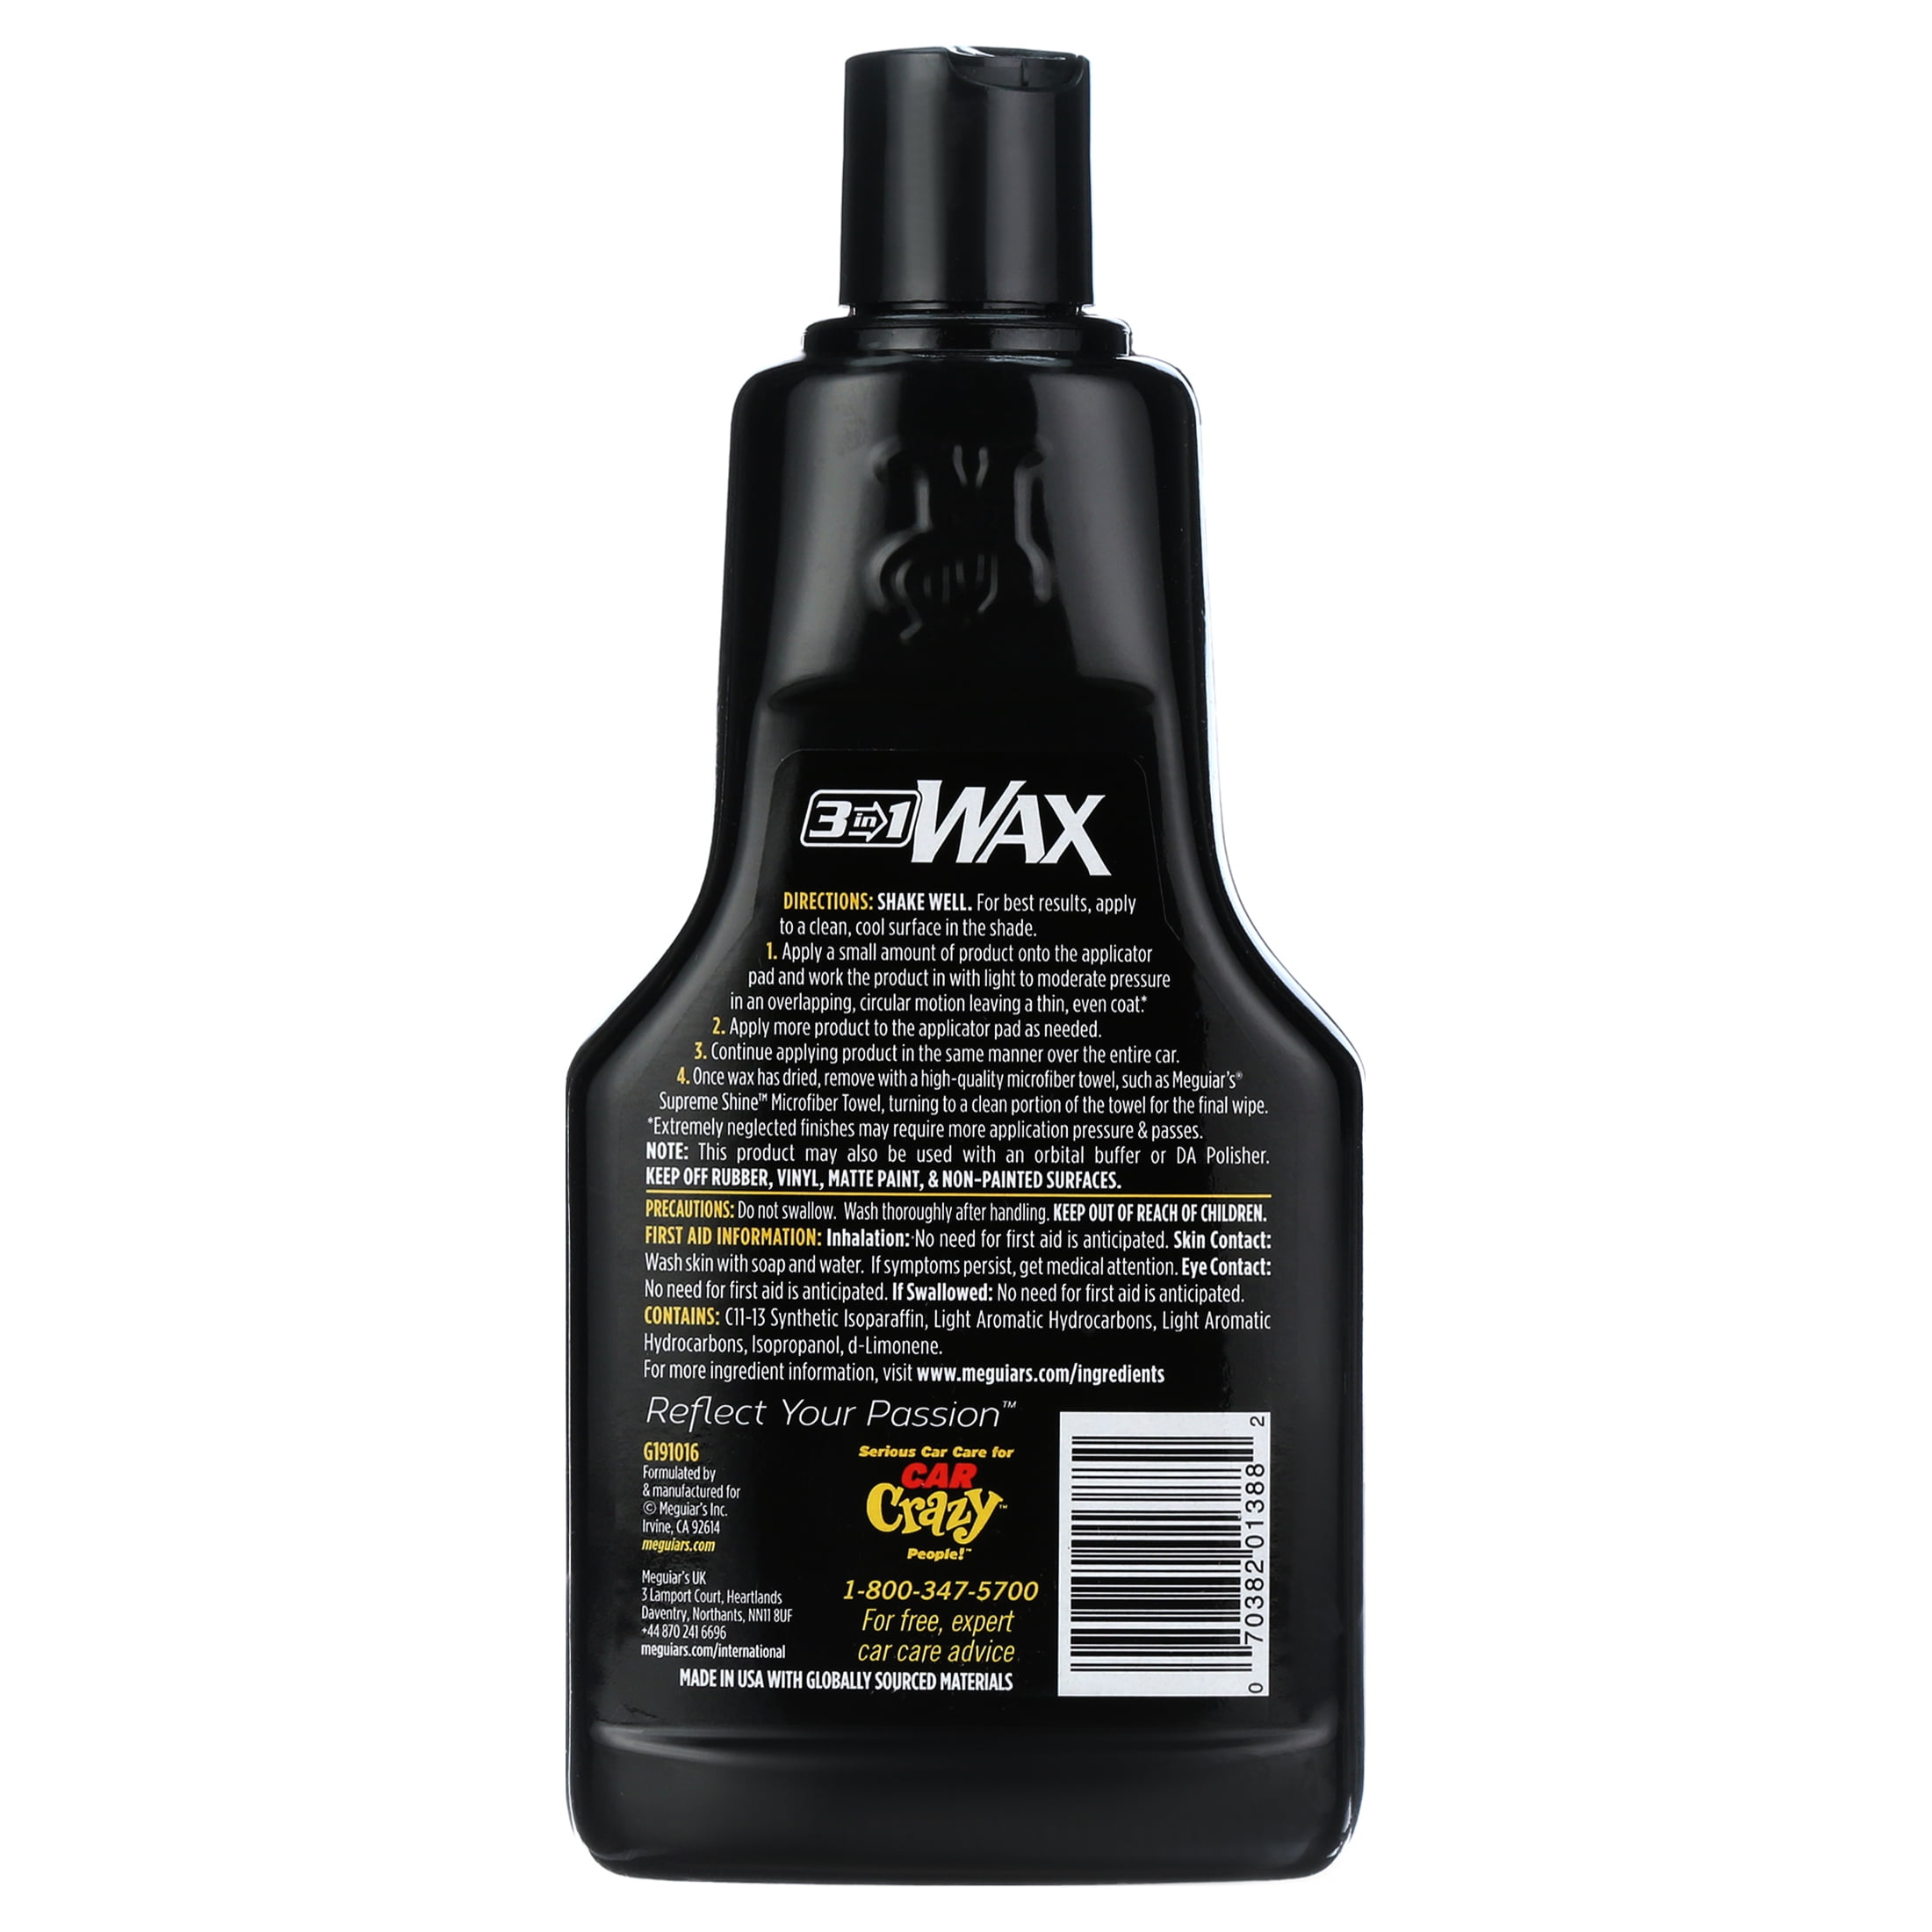 Meguiars G191016 3-in-1 Wax Multiple Steps, One Easy to Use Wax, 16 oz